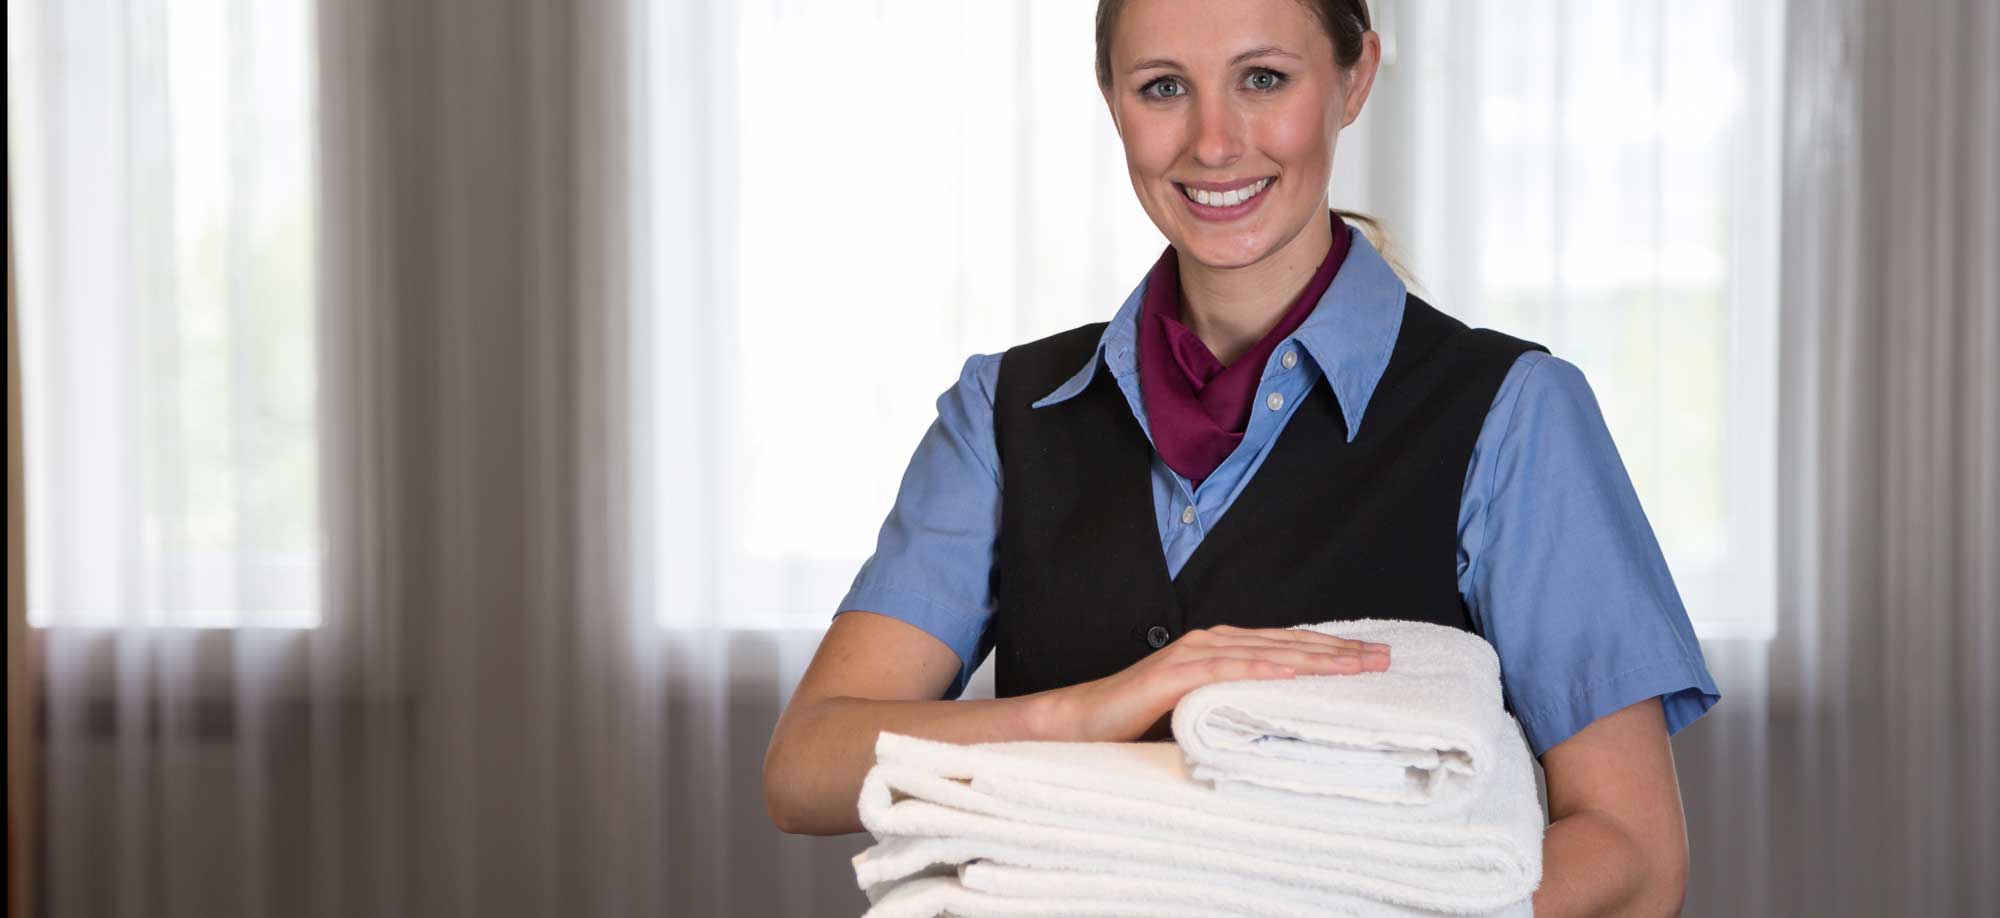 Colorado Laundry Equipment is perfect for Hotels